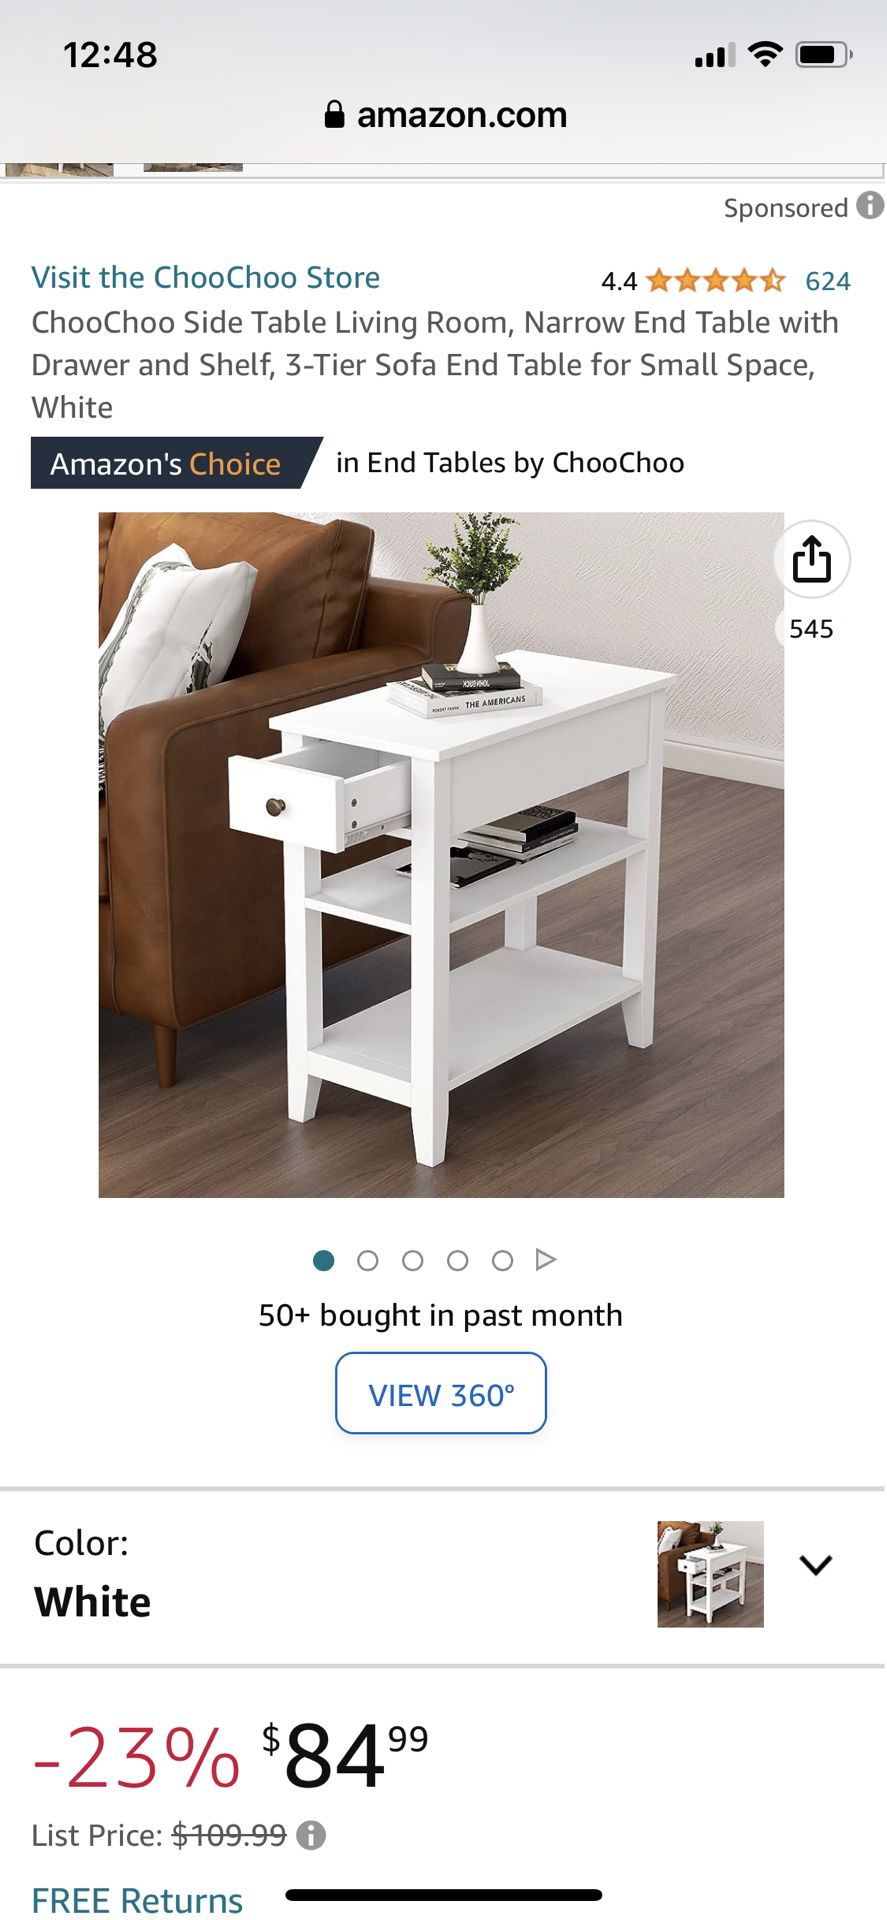 ChooChoo Side Table Living Room, Narrow End Table with Drawer and Shelf, 3-Tier Sofa End Table for Small Space, White